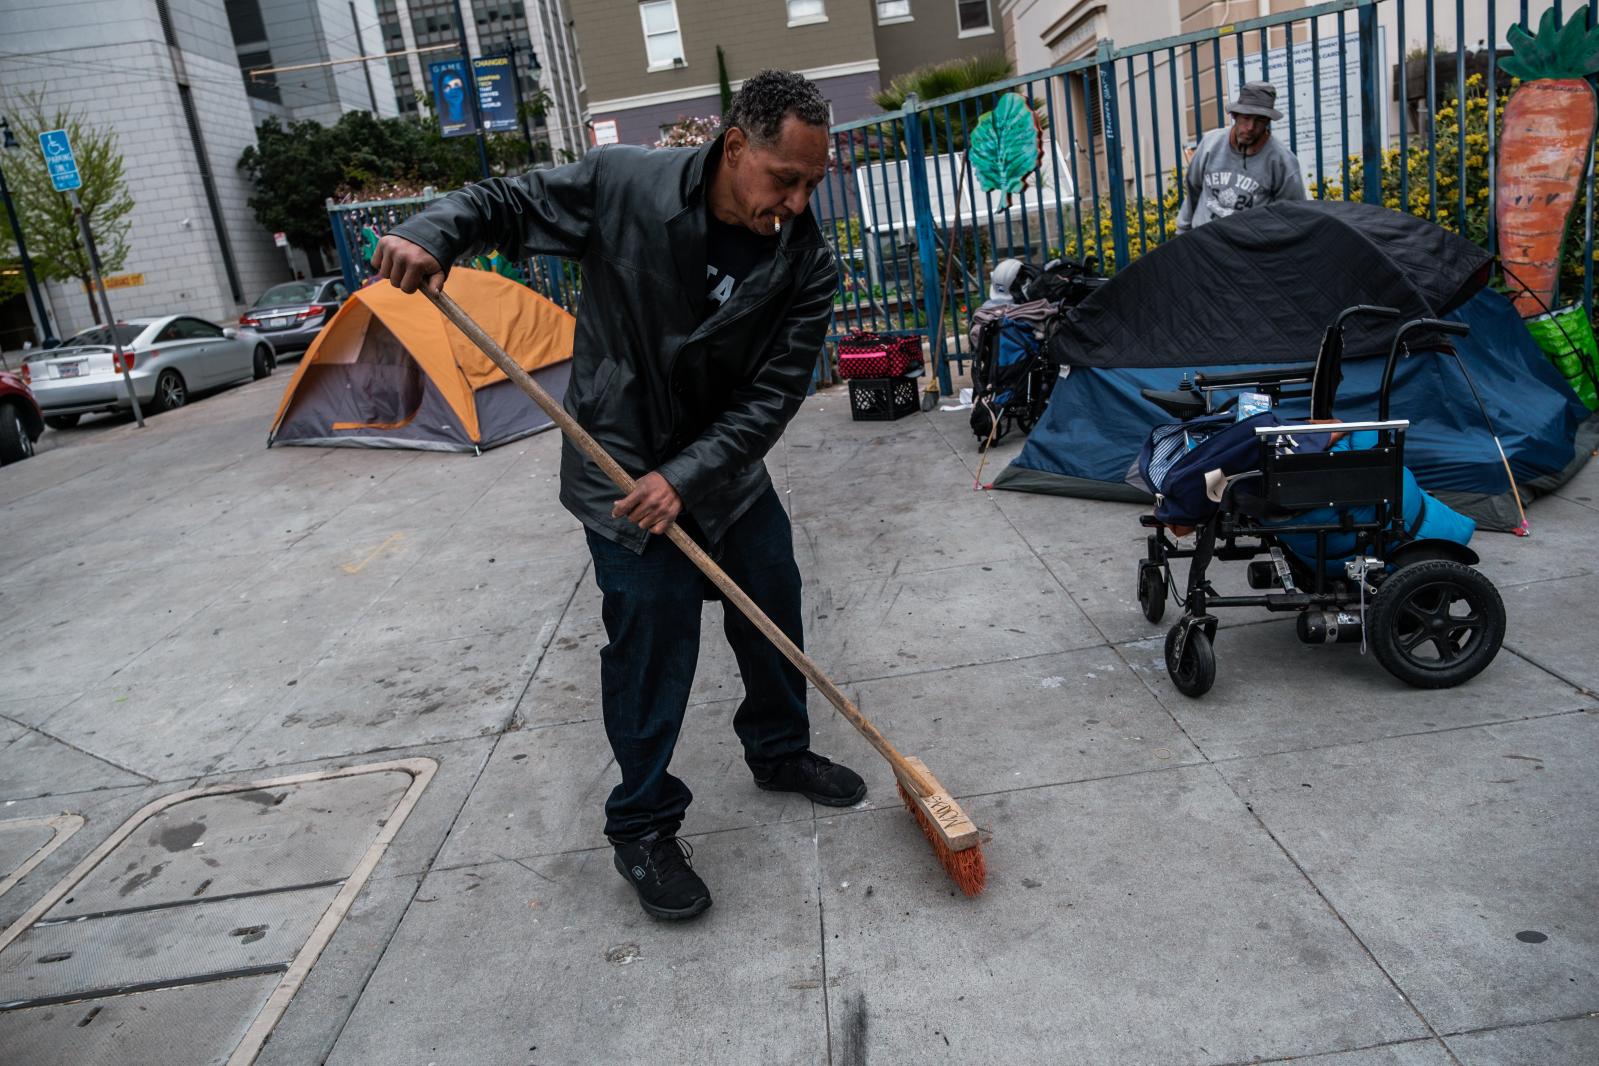 Image from San Francisco's Housing Crisis - Mojo Dumetz, a homeless man, sweeps up the area around...